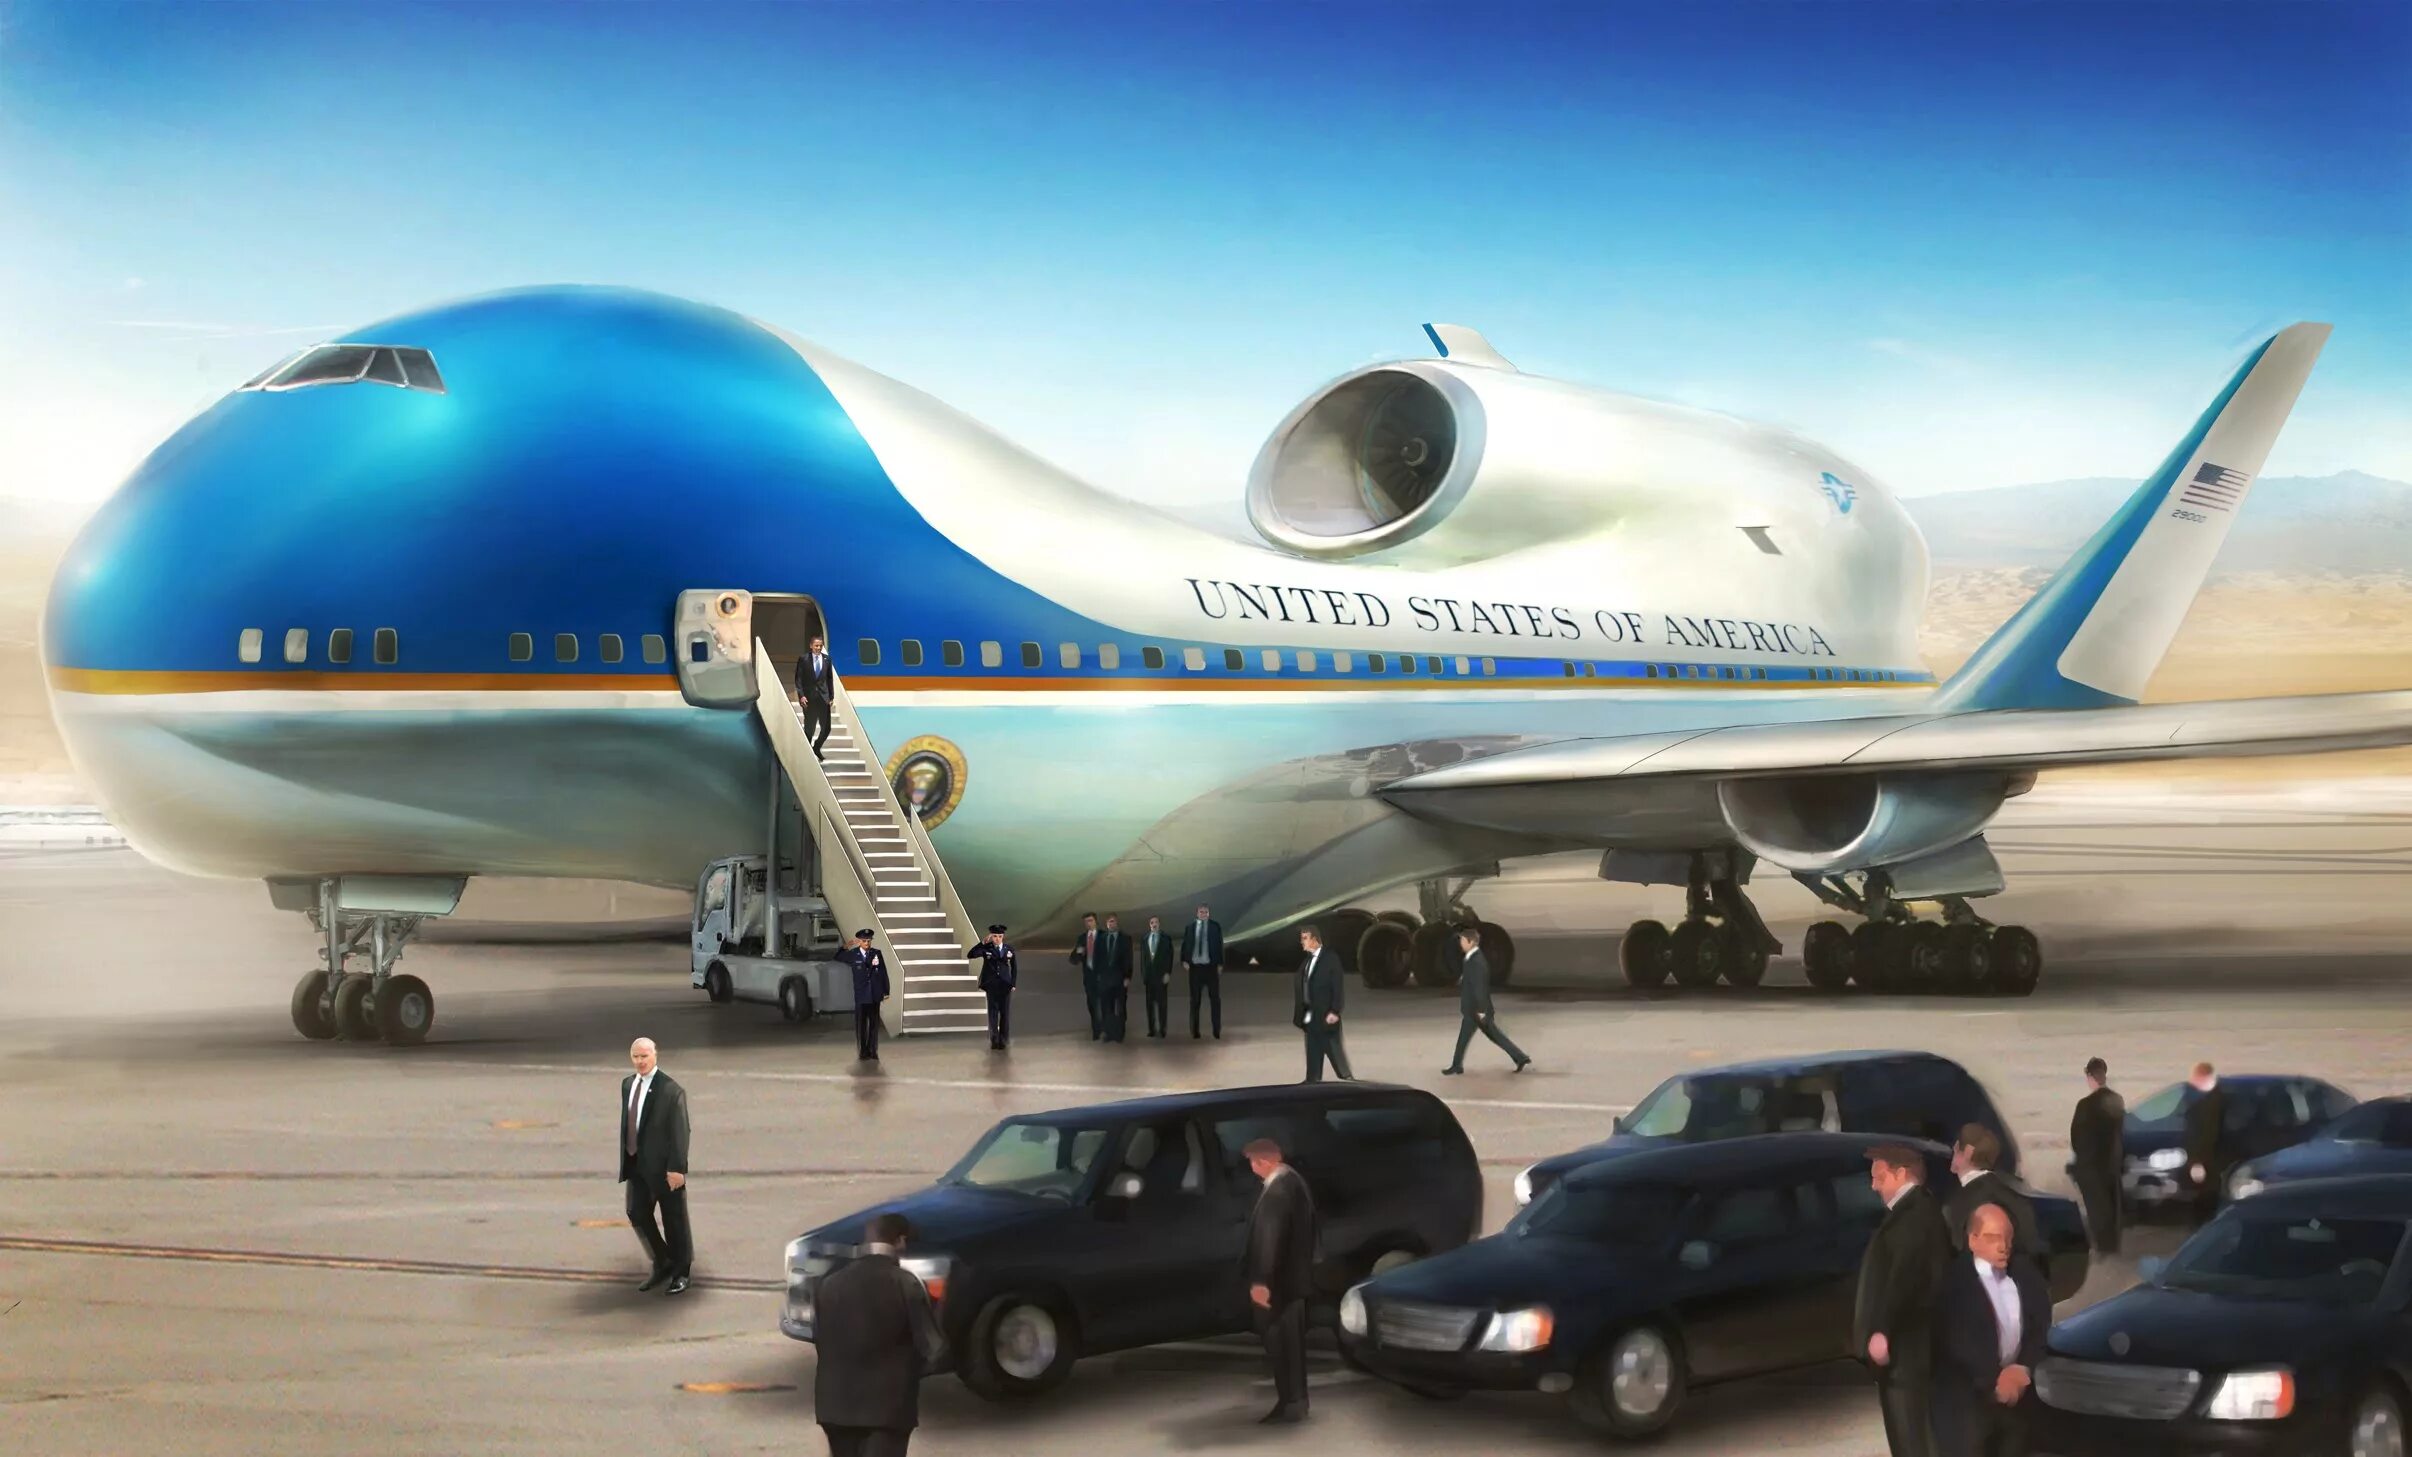 Самолета том 1. Air Force one самолет. Air Force 1 самолет. Боинг 747 президента США. New Air Force one.